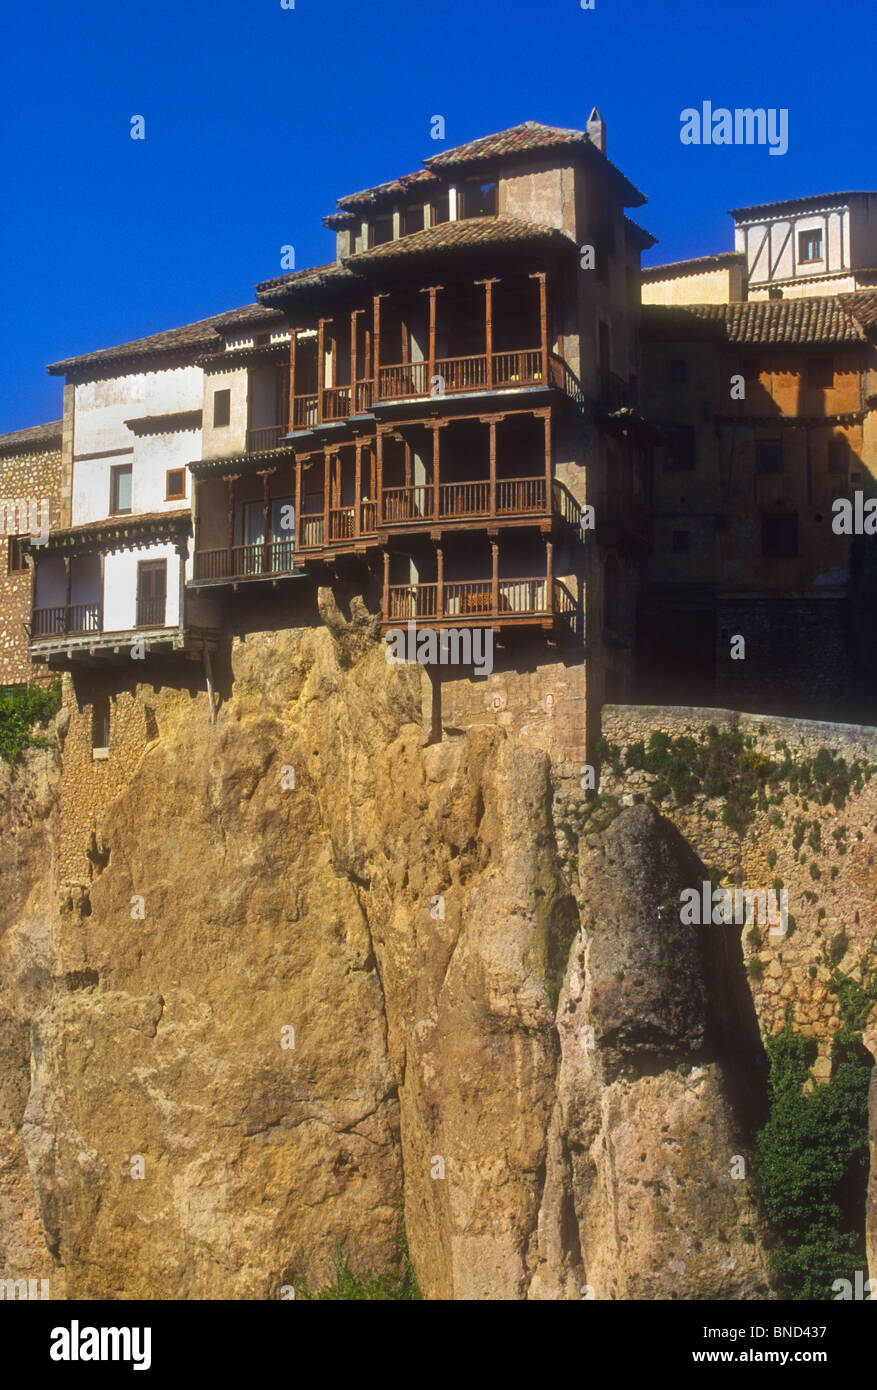 Museum of abstract art old town of Cuenca Spain Stock Photo